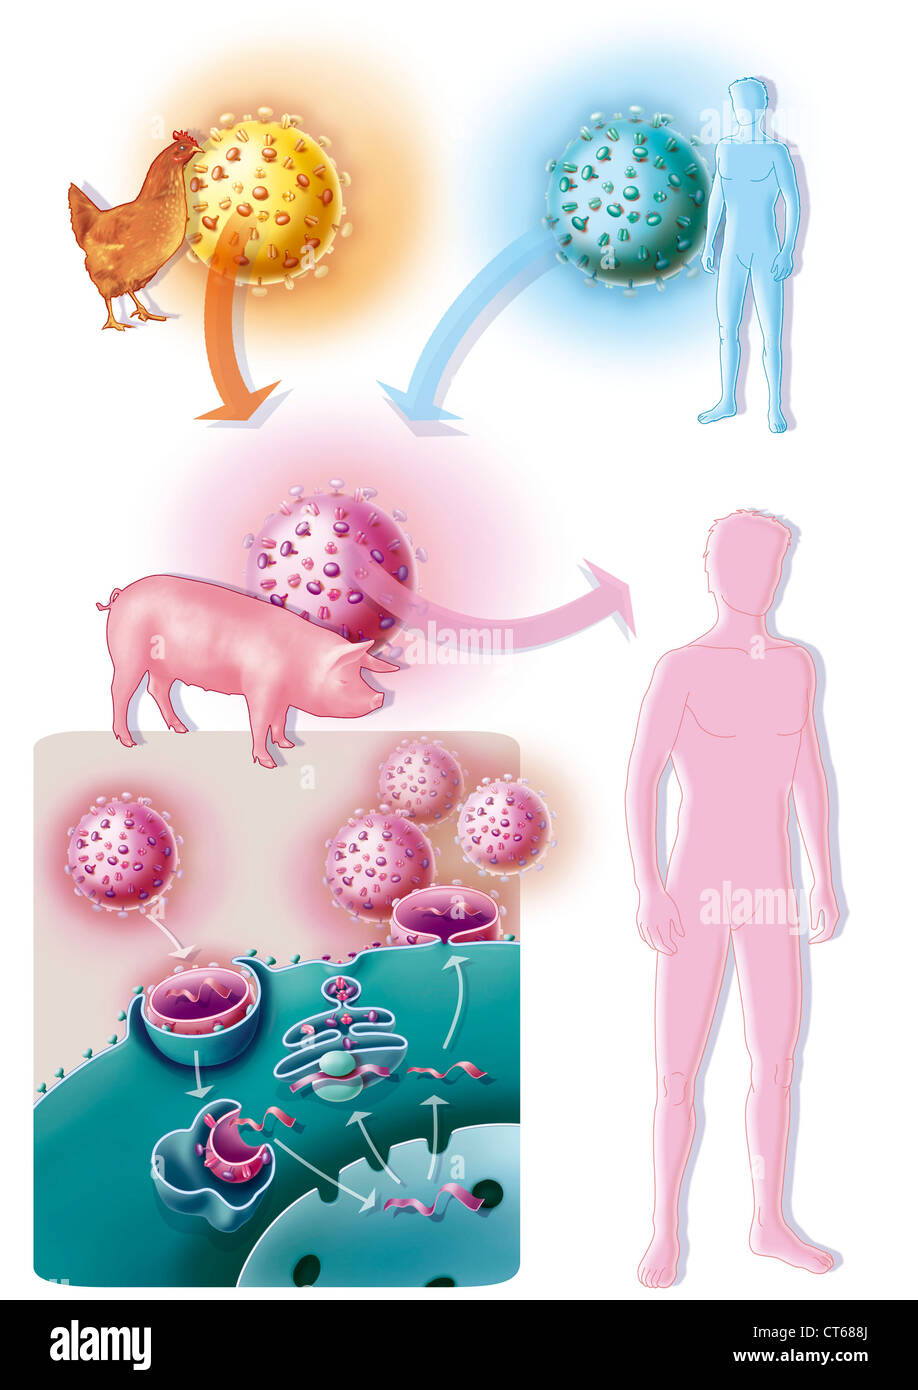 INFLUENZA A H1N1 INFECTION Stock Photo